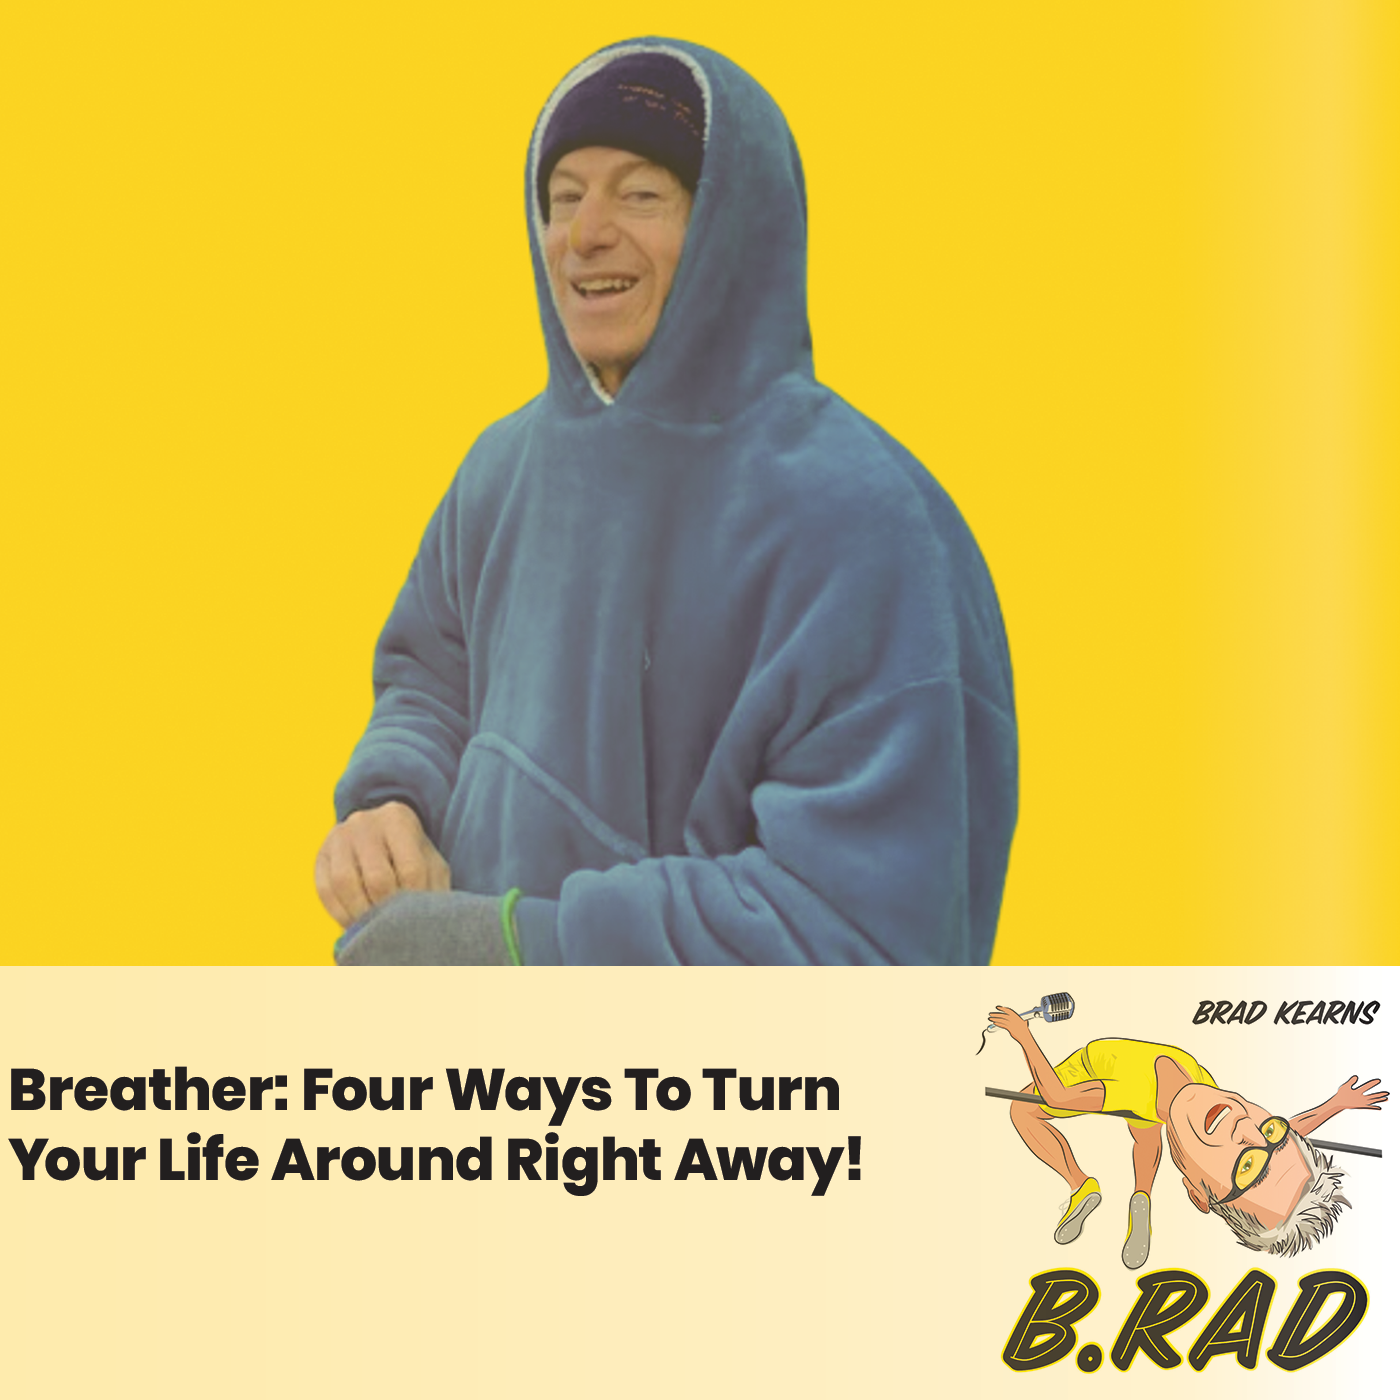 Breather: Four Ways To Turn Your Life Around Right Away!